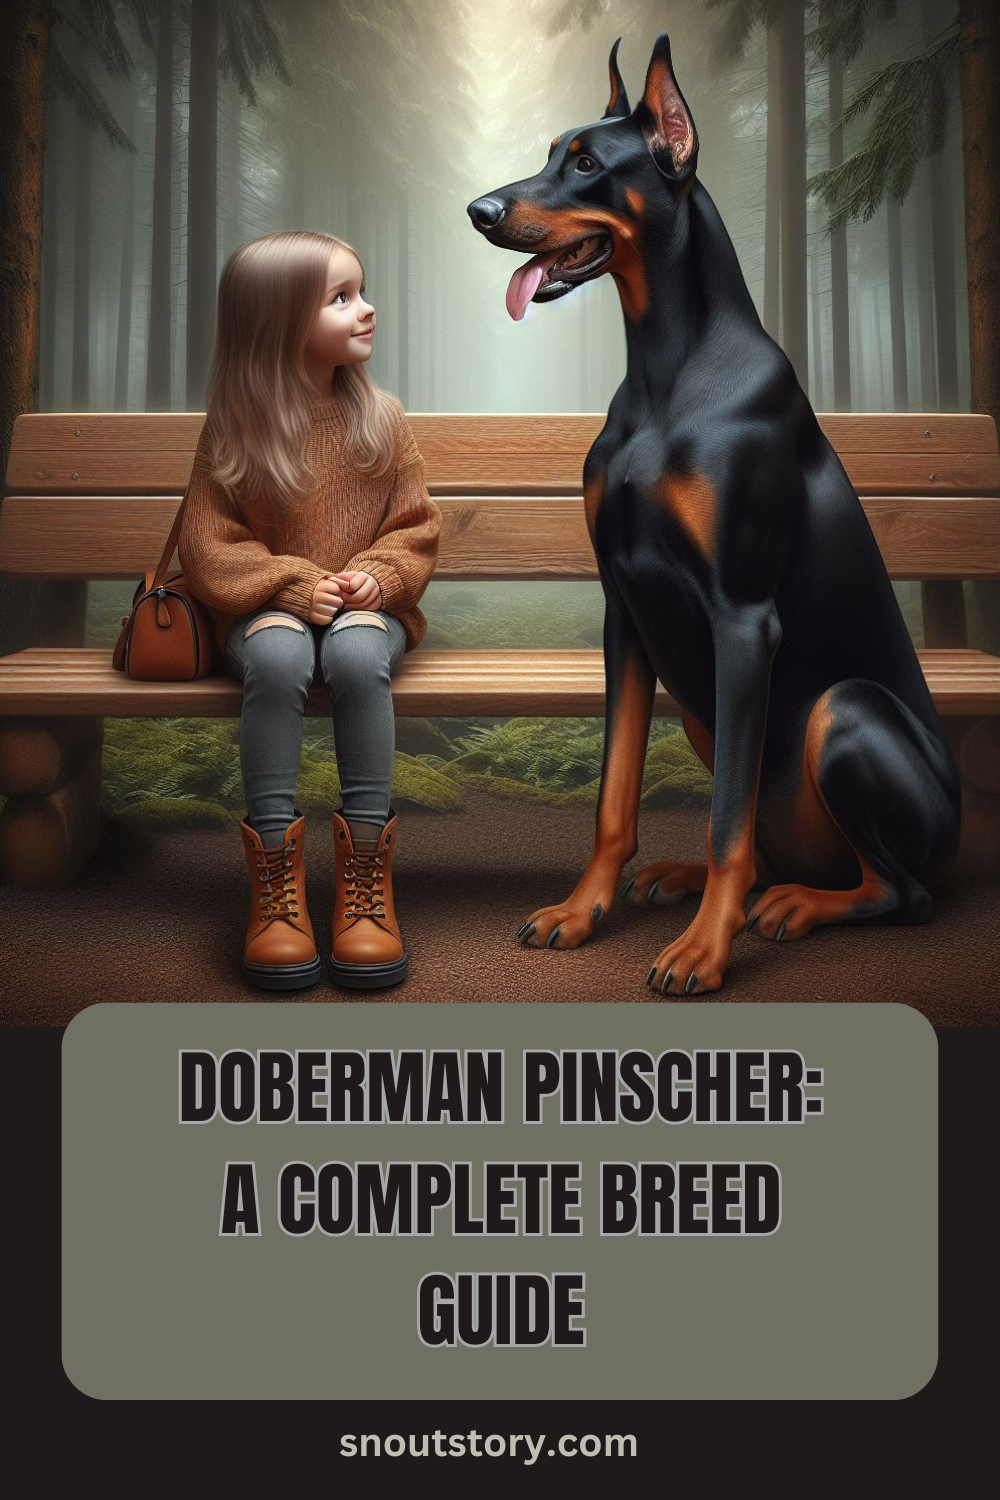 The Doberman Pinscher: Complete Breed Guide